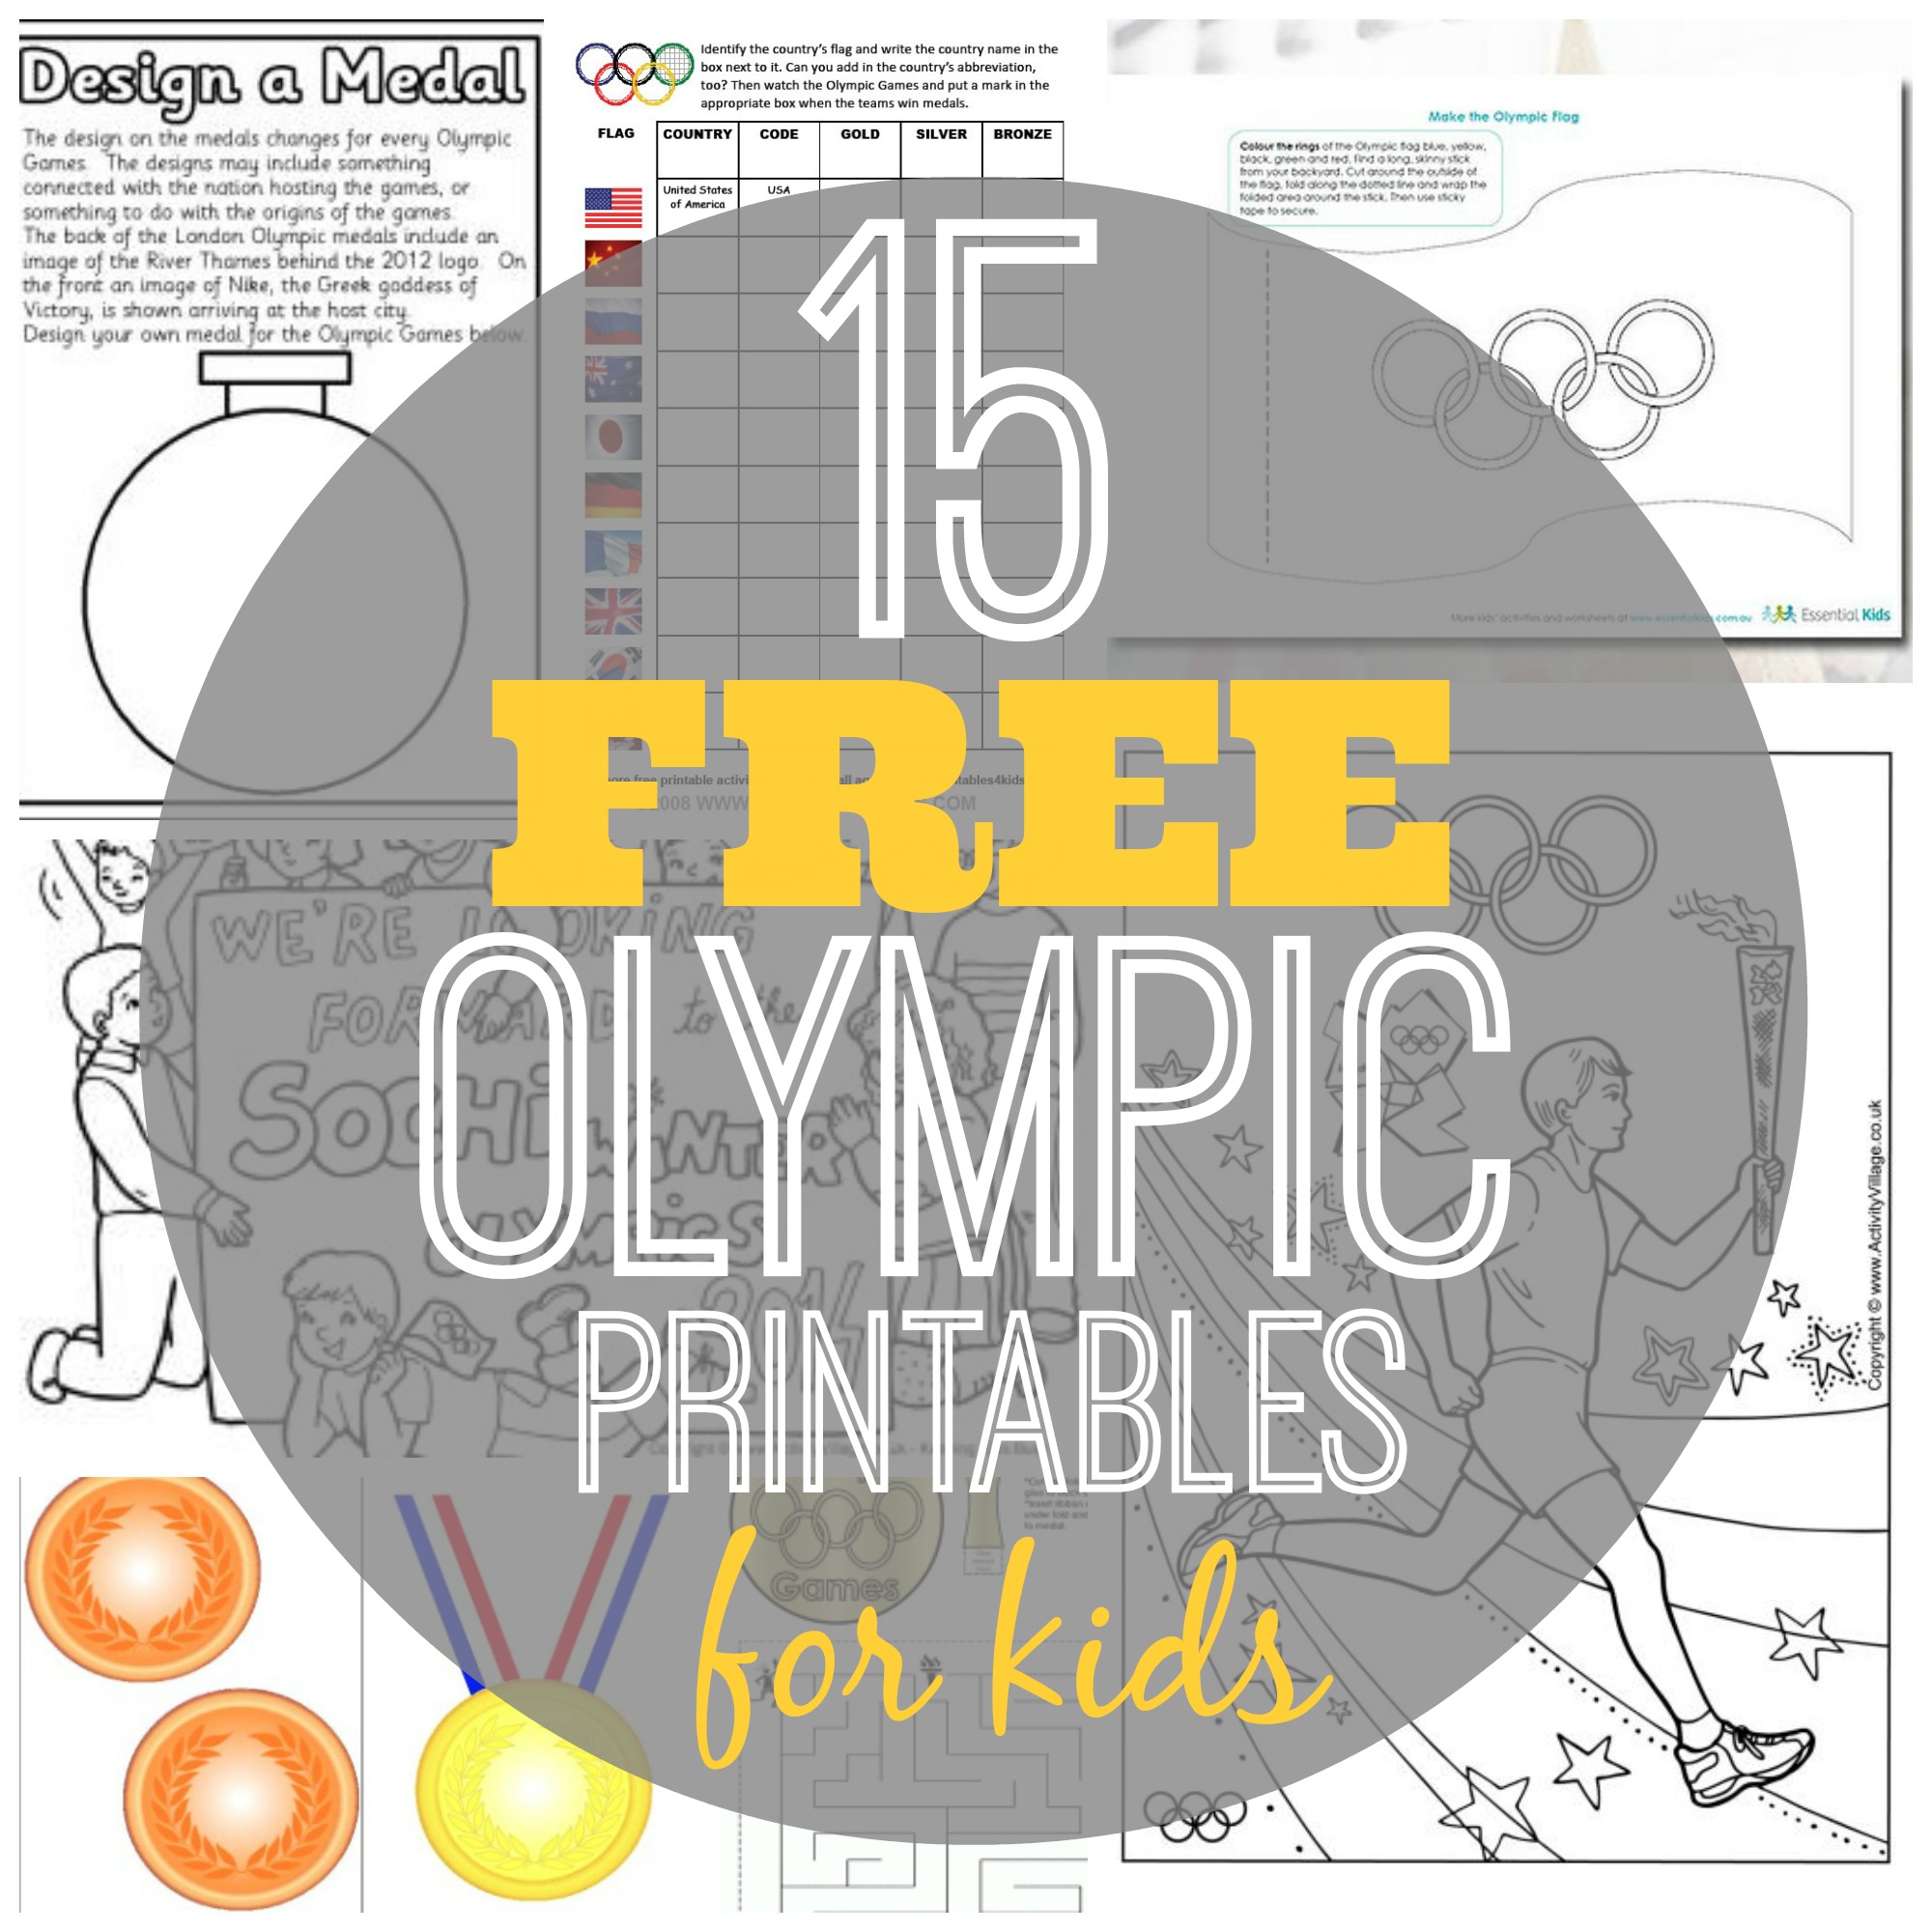 15 Free Olympic Printables for Kids coloring pages, medal count score